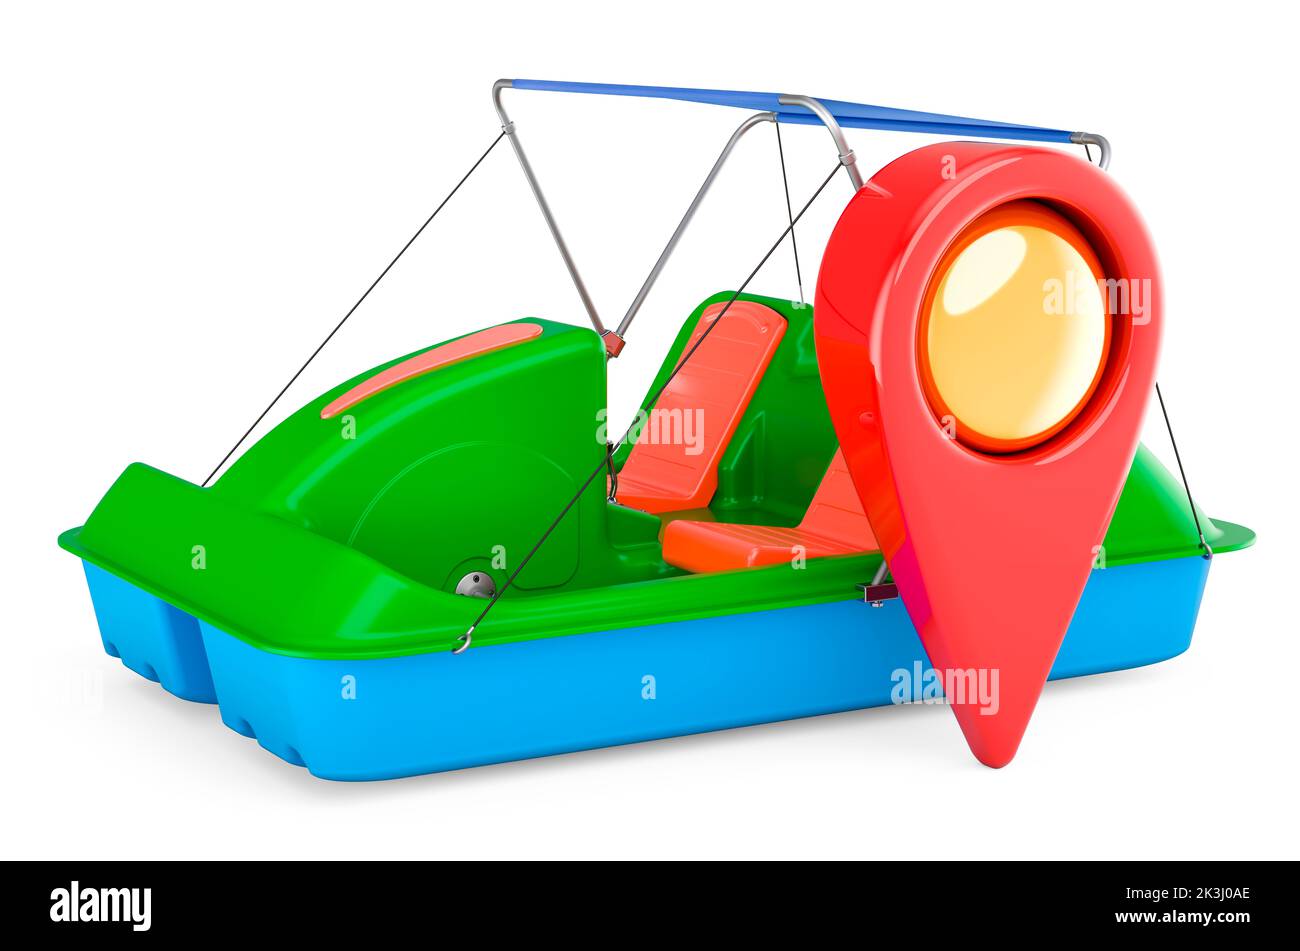 Paddle boat with map pointer, 3D rendering isolated on white background Stock Photo